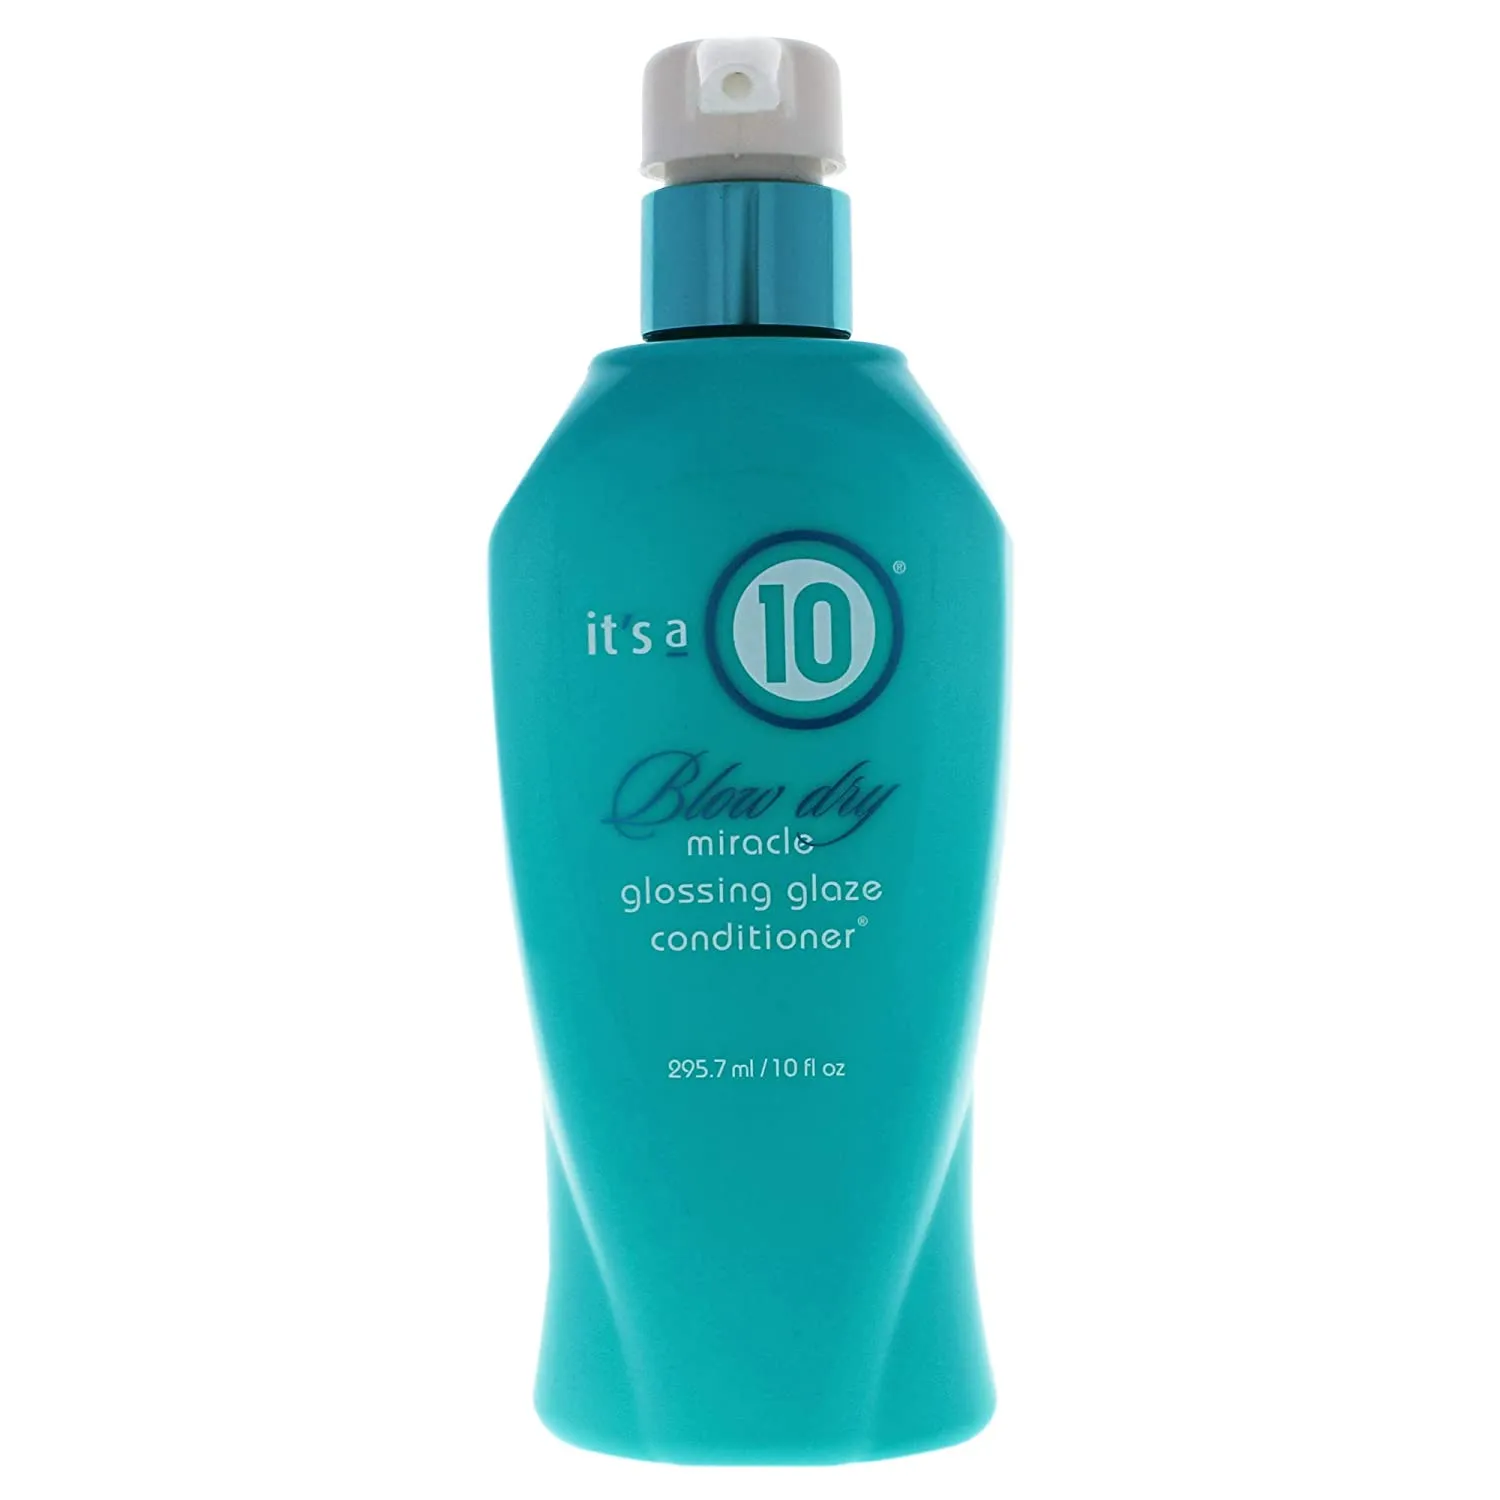 it's a 10 Blow Dry Miracle Glossing Glaze Conditioner